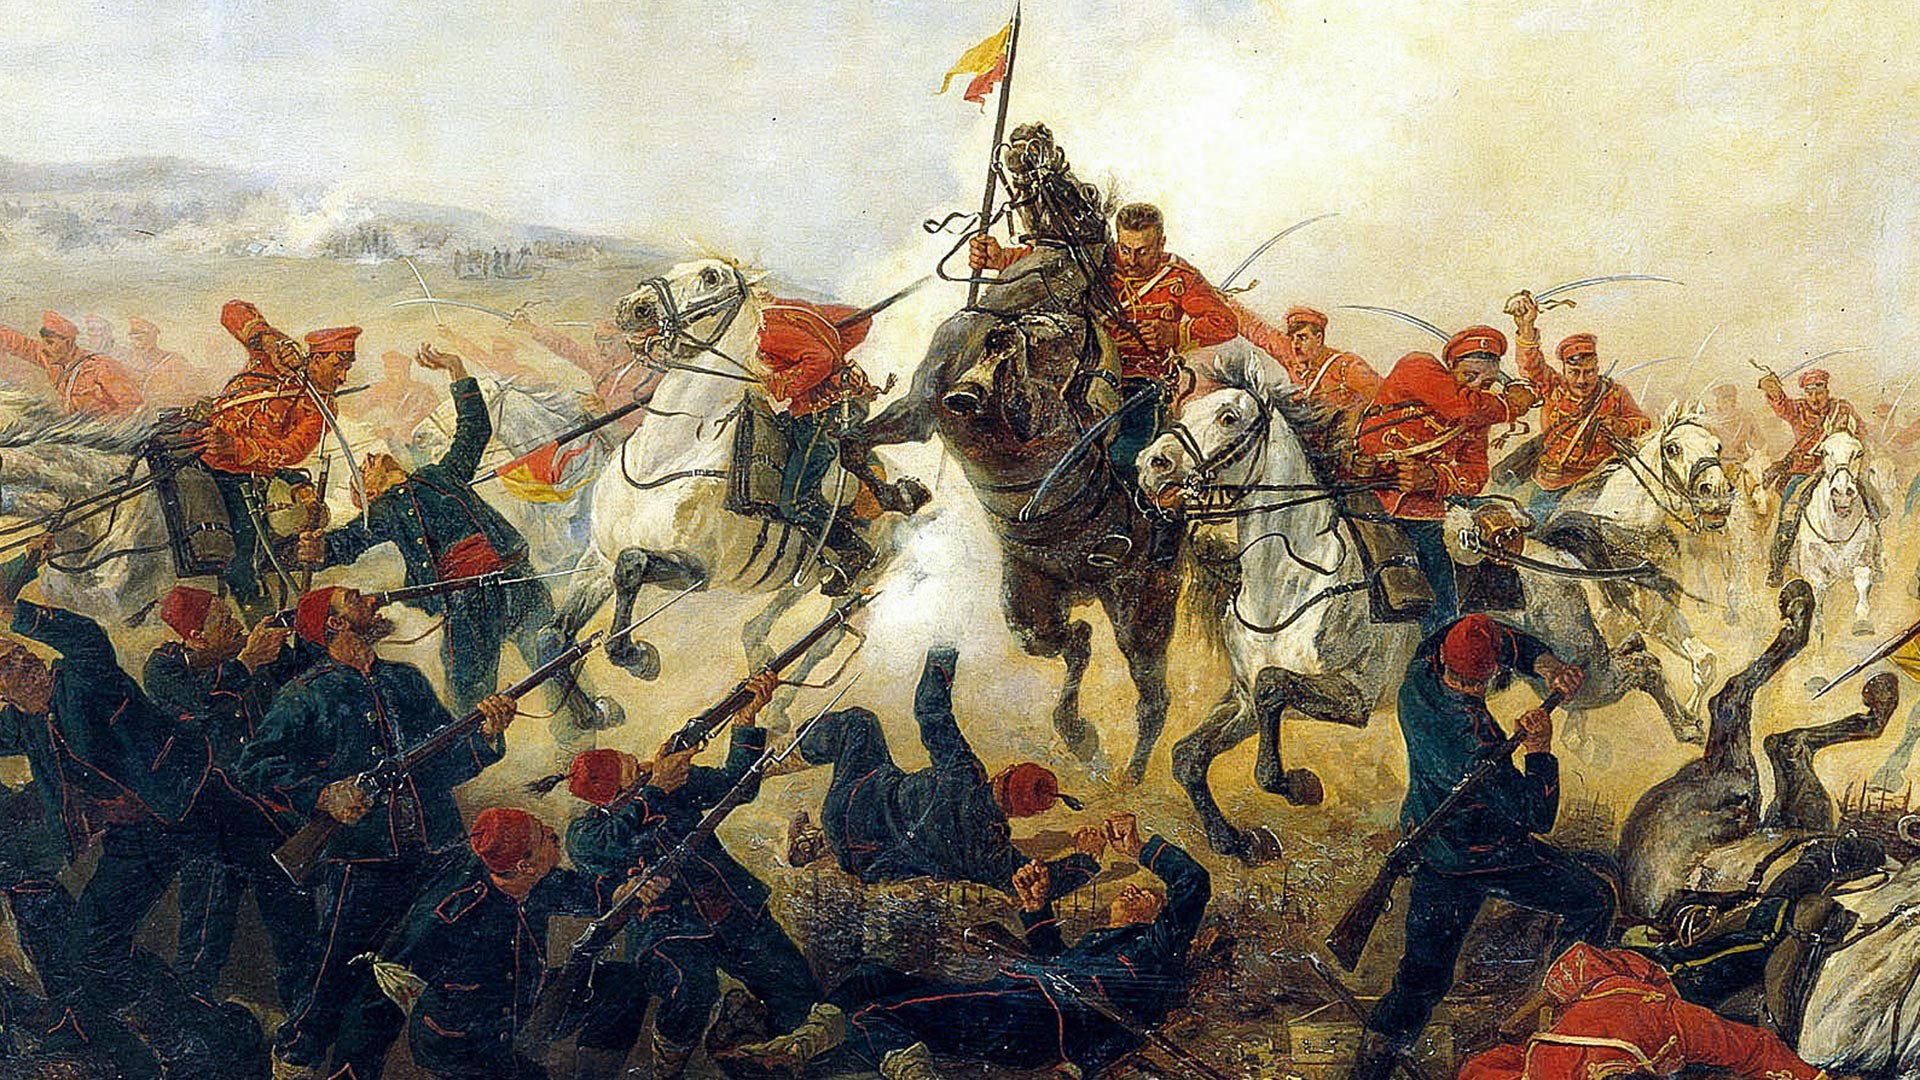 "Fight near Telish during the Russo-Turkish War of 1877-1878".